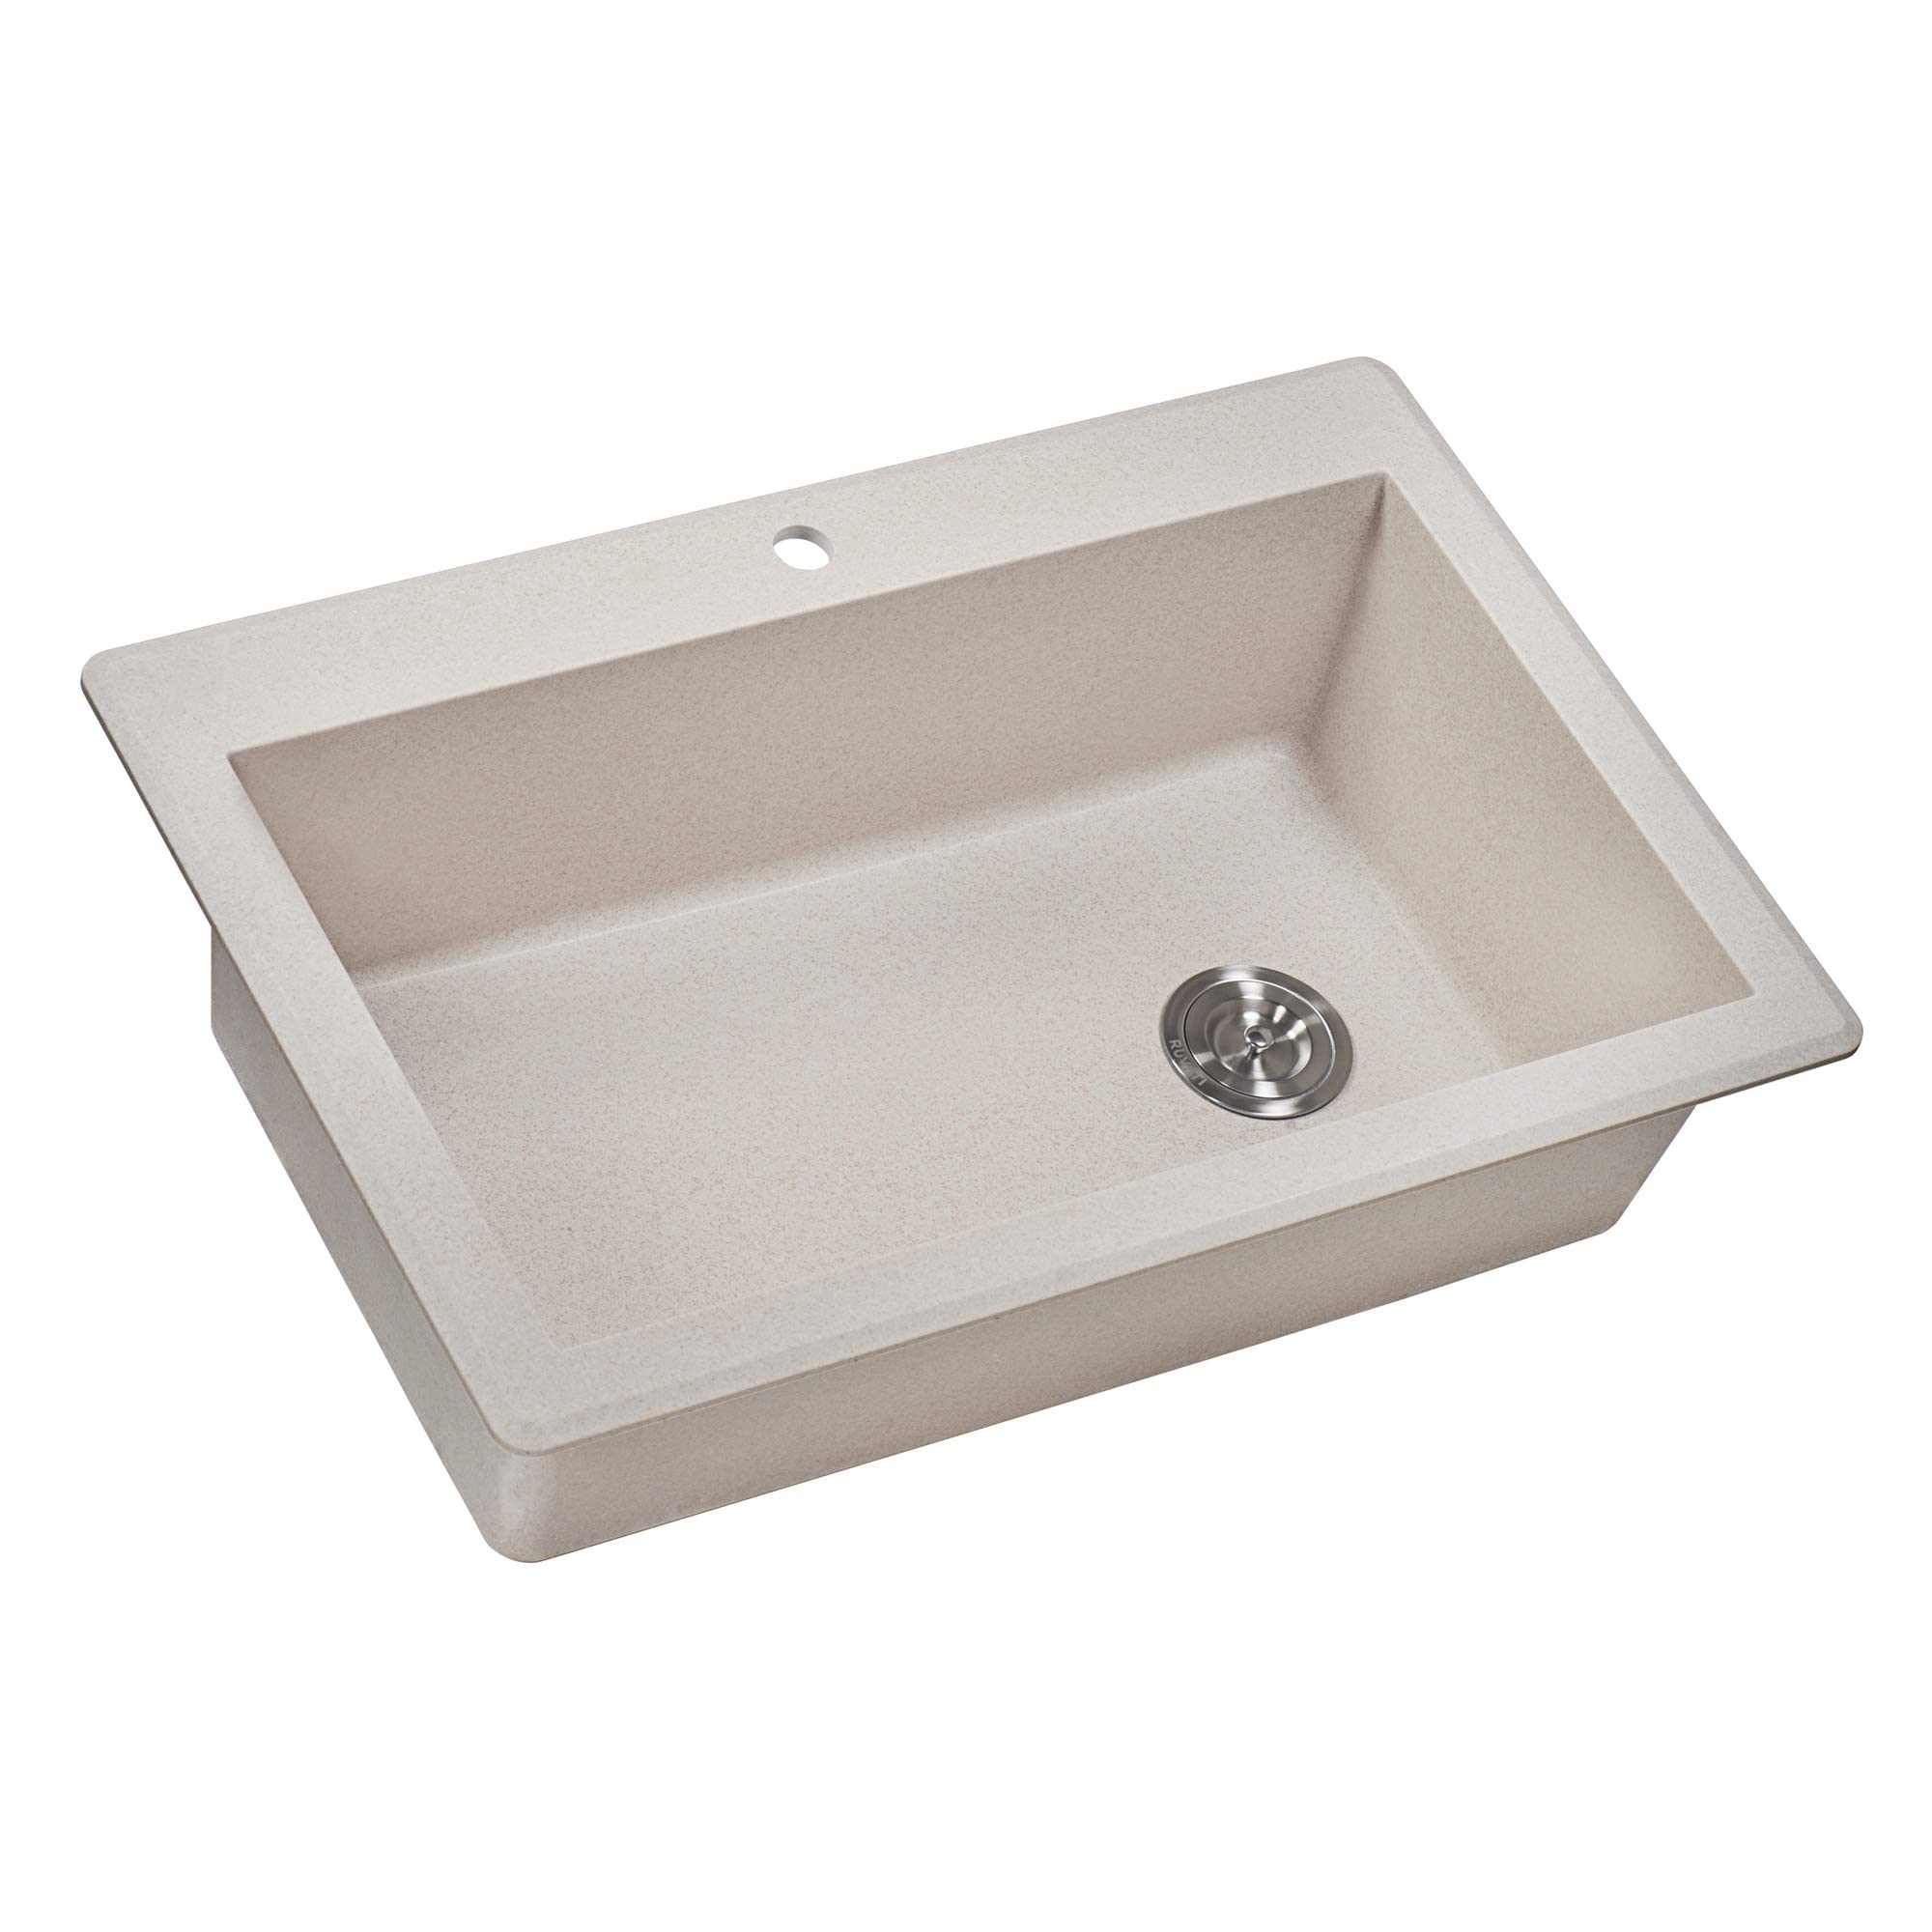 33 x 22 inch Drop-in Topmount Granite Composite Double Bowl Kitchen Sink - Arctic White - RVG1338WH